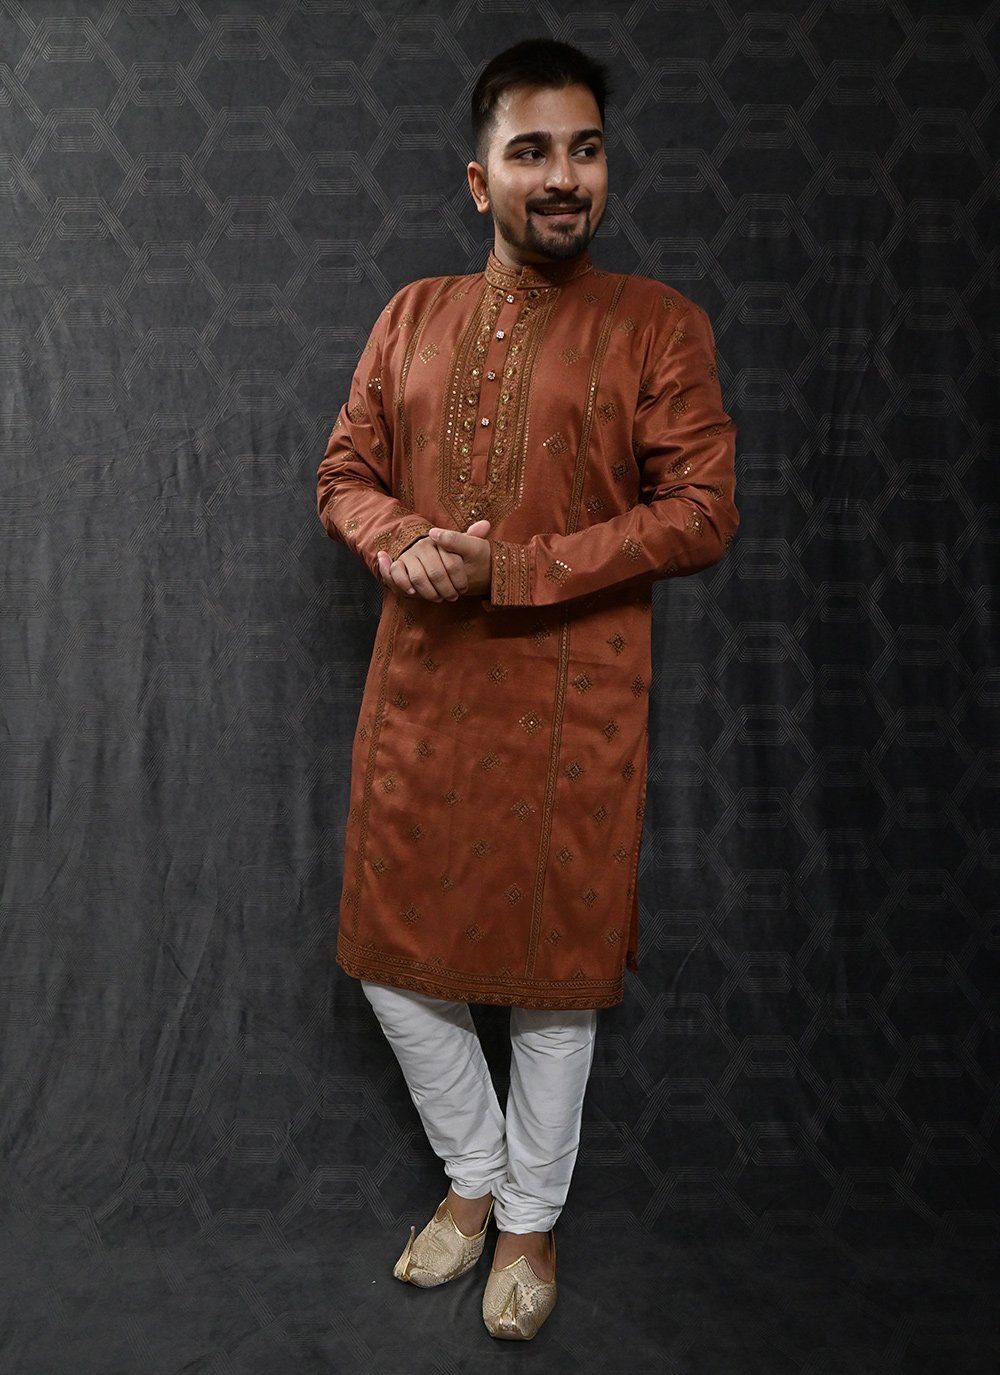 Rust Silk Kurta Pyjama with Embroidered, Sequins and Thread Work for Men